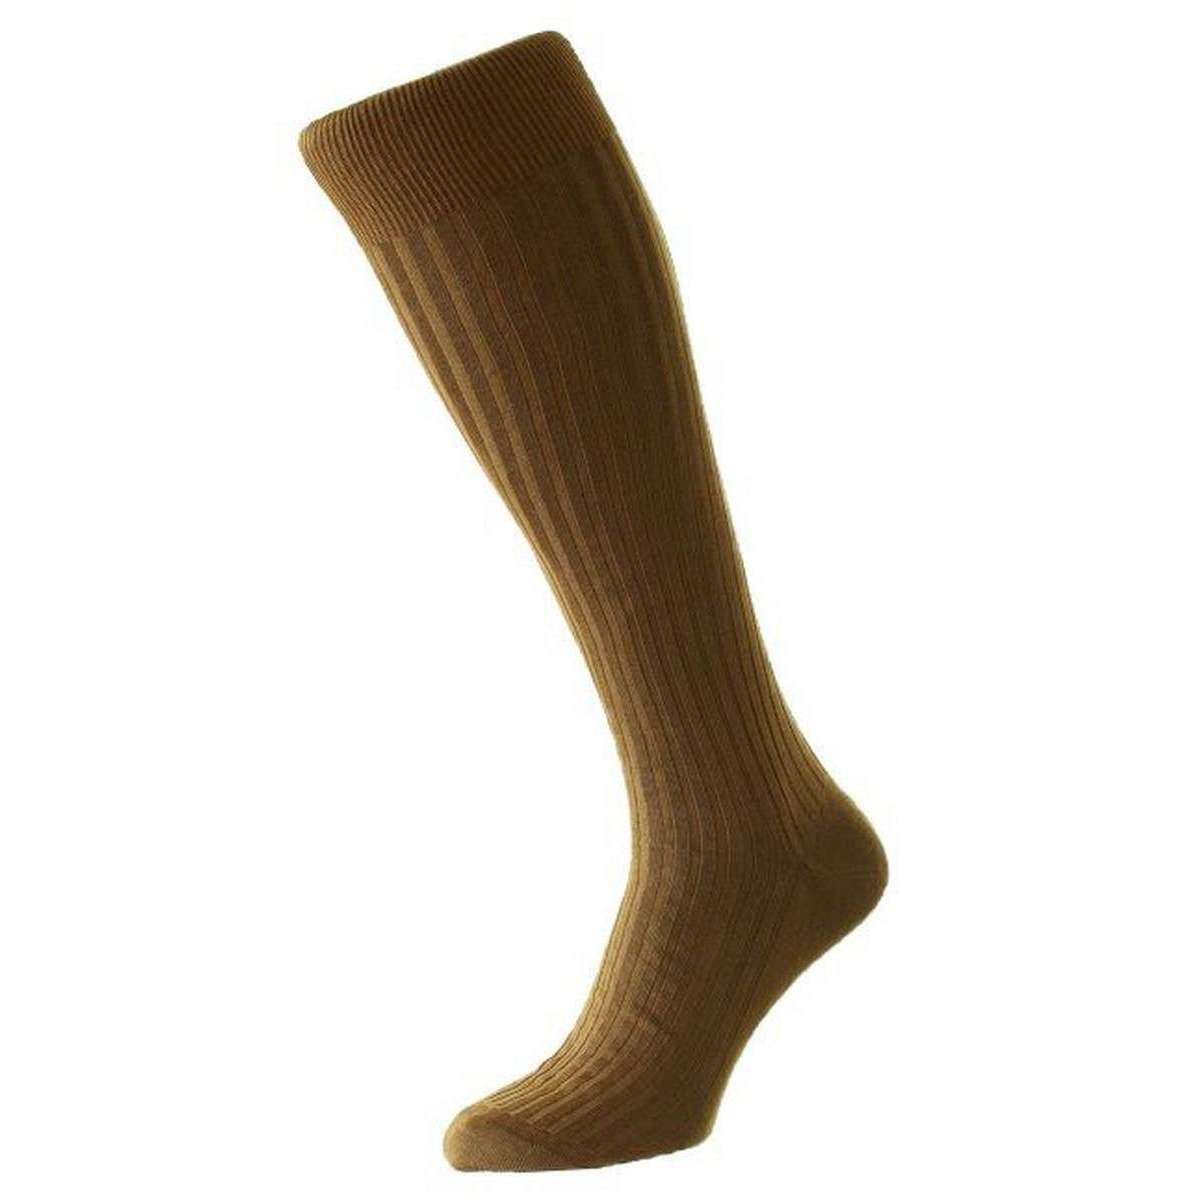 Pantherella Danvers Cotton Fil D’Ecosse Over the Calf Socks - Mid Brown